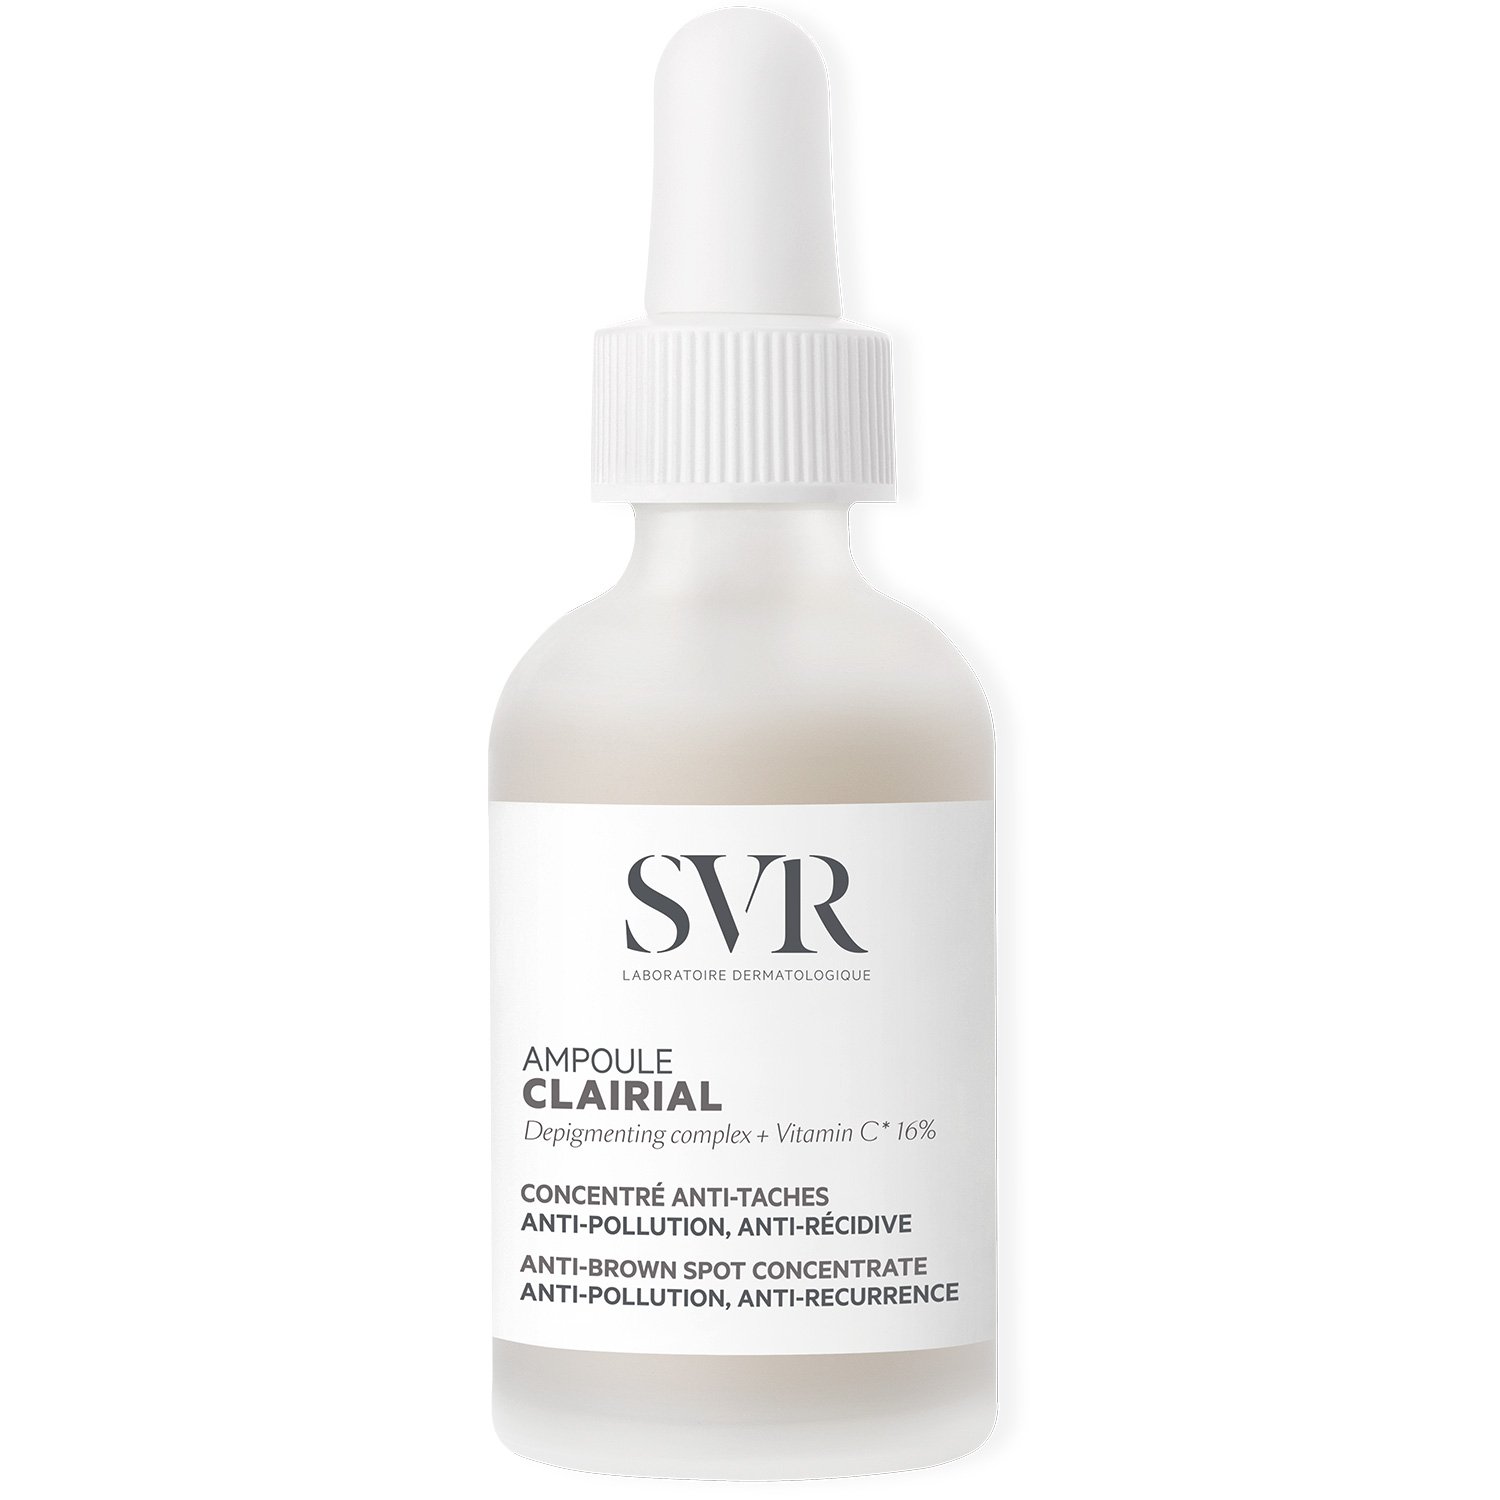 Концентрат проти пігментних плям SVR Clairial Ampoule Anti-Brown Spot Concentrate, 30 мл - фото 1